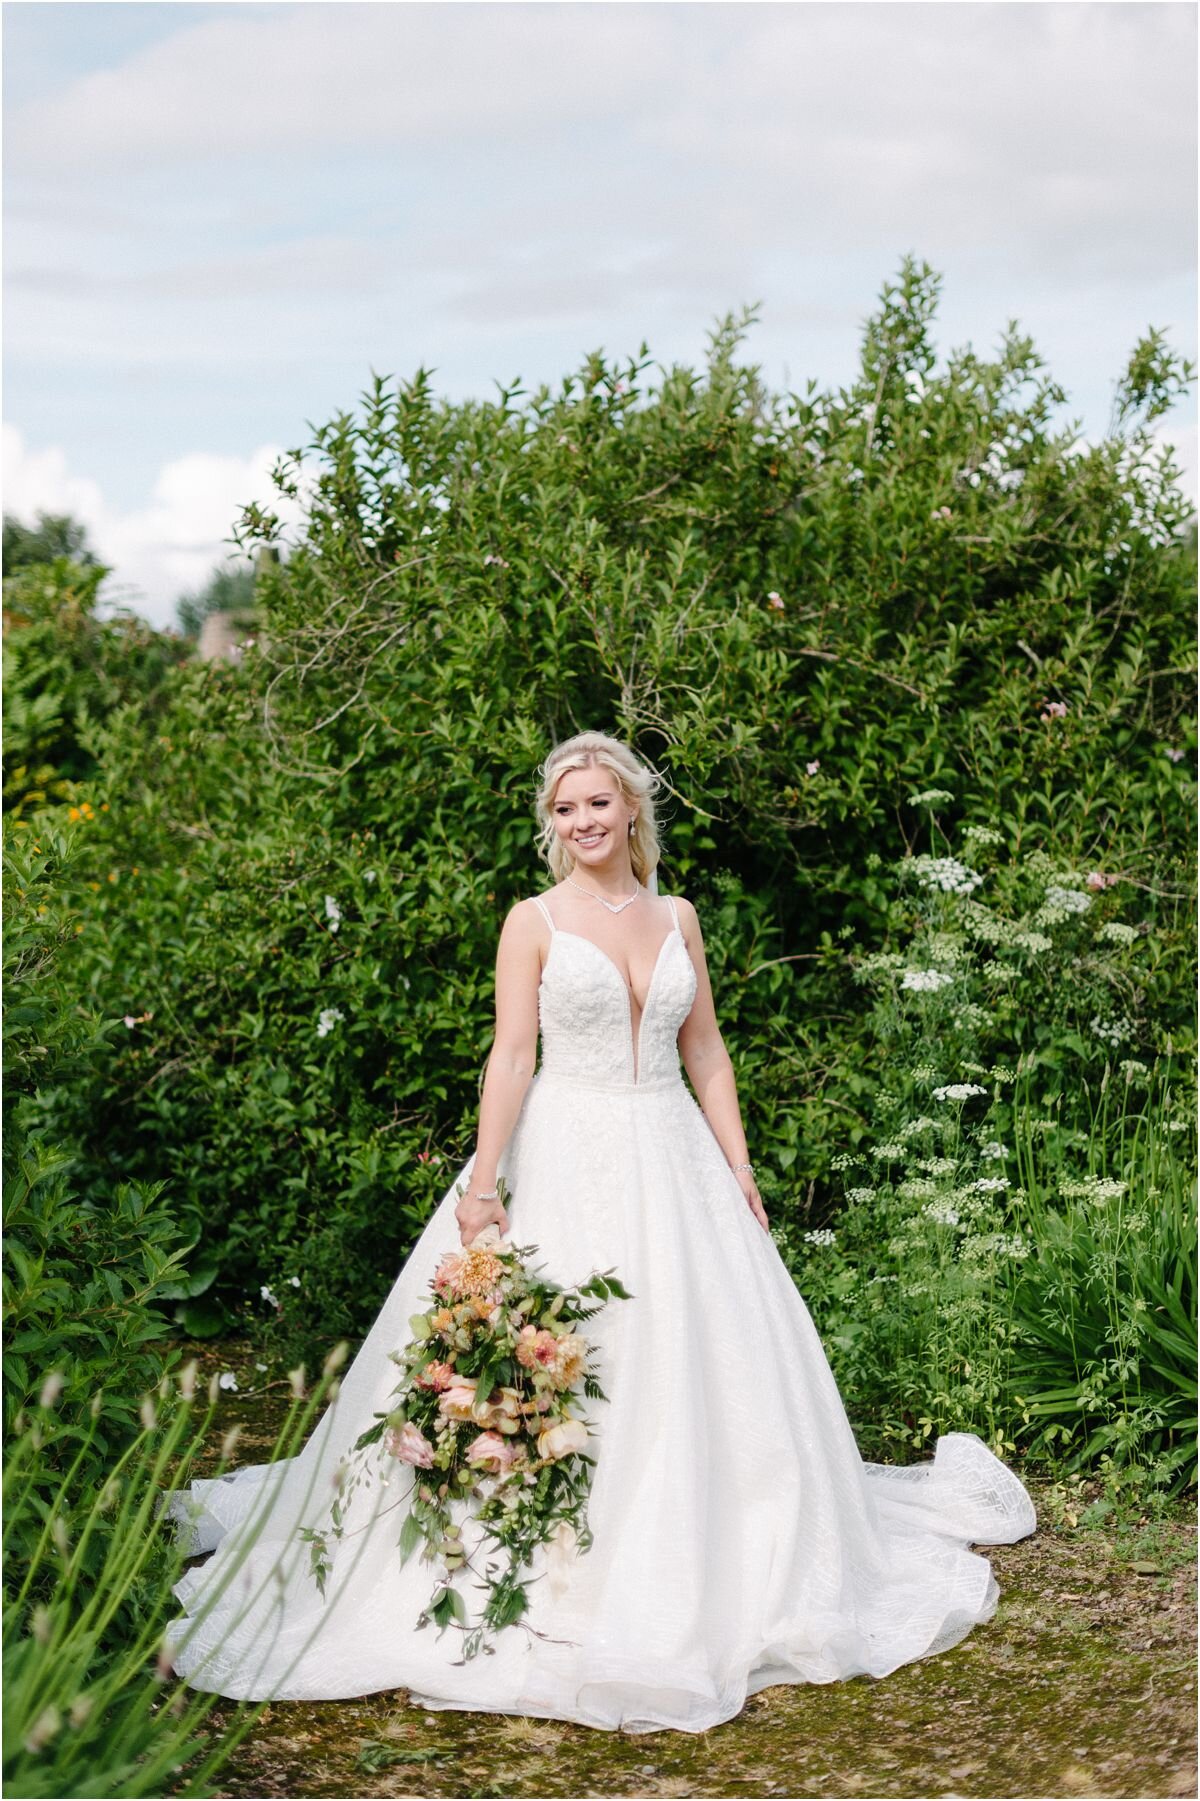  A portrait of a bride in a white dress during a Summer wedding at Winton castle Scotland with rustic flowers bouquet 